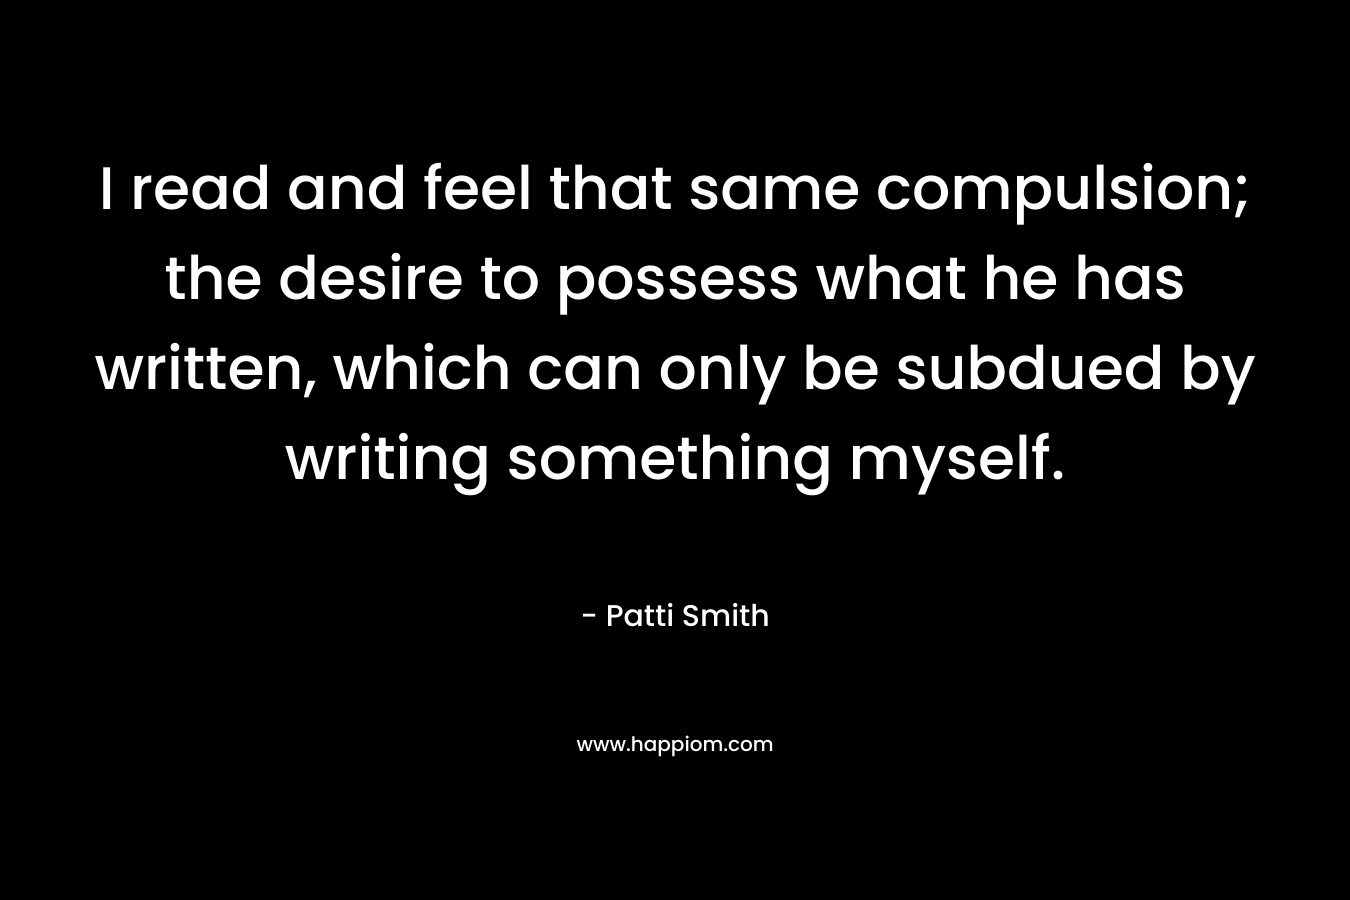 I read and feel that same compulsion; the desire to possess what he has written, which can only be subdued by writing something myself. – Patti Smith